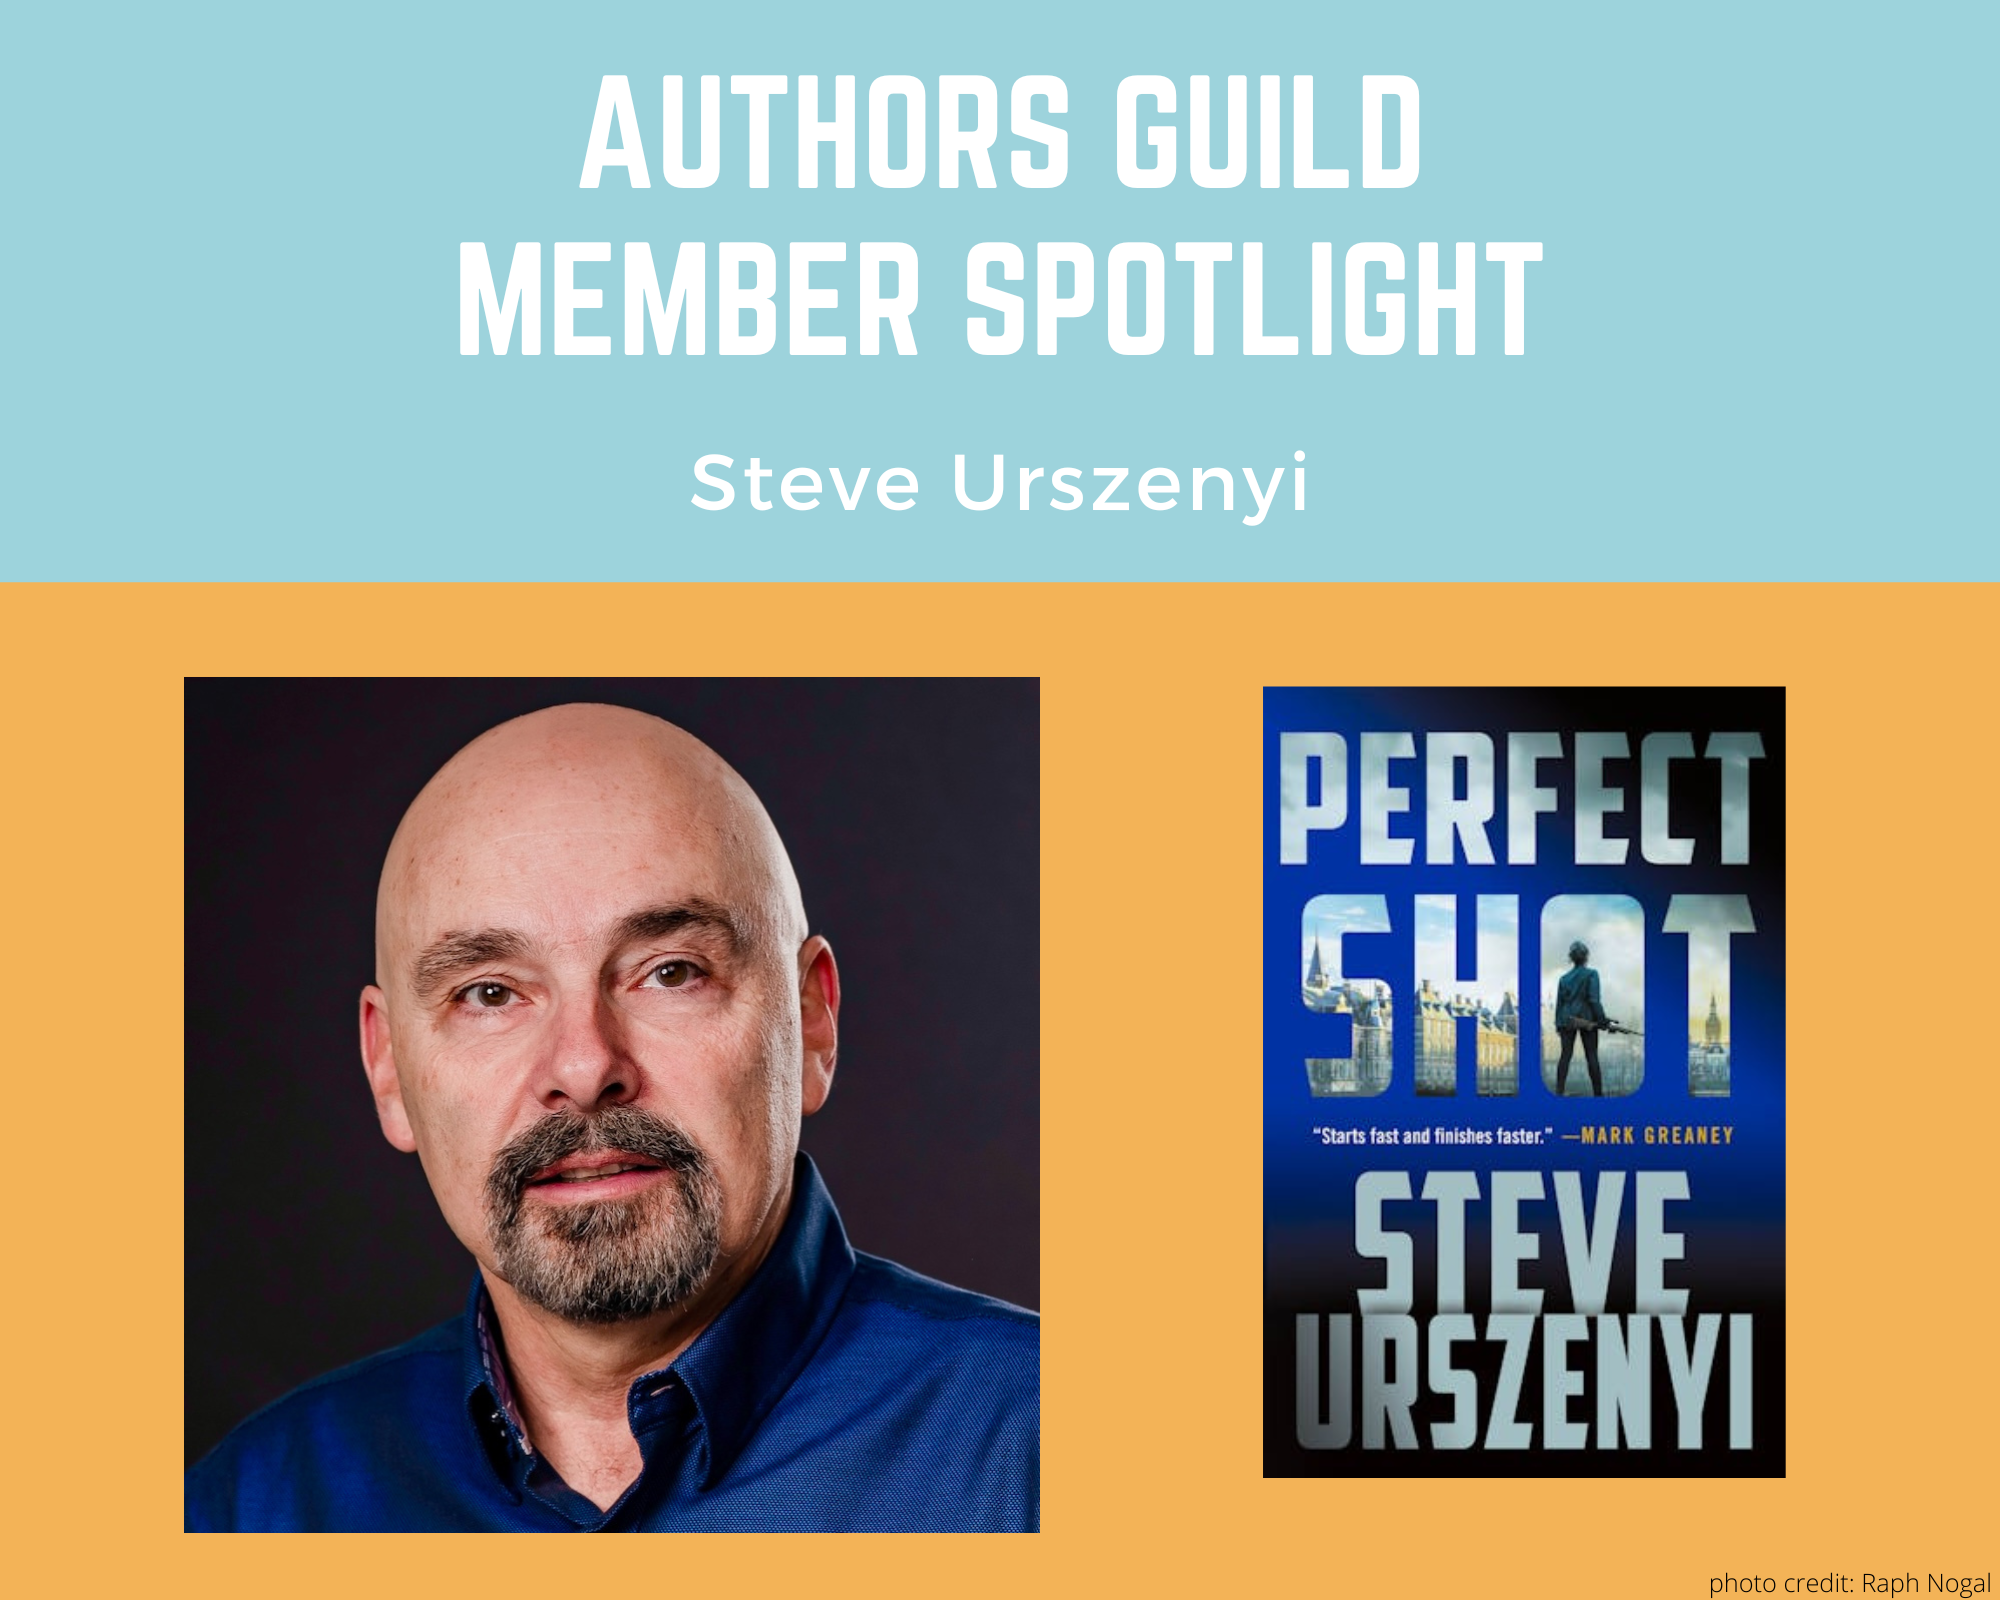 author Steve Urszenyi and his book Perfect Shot